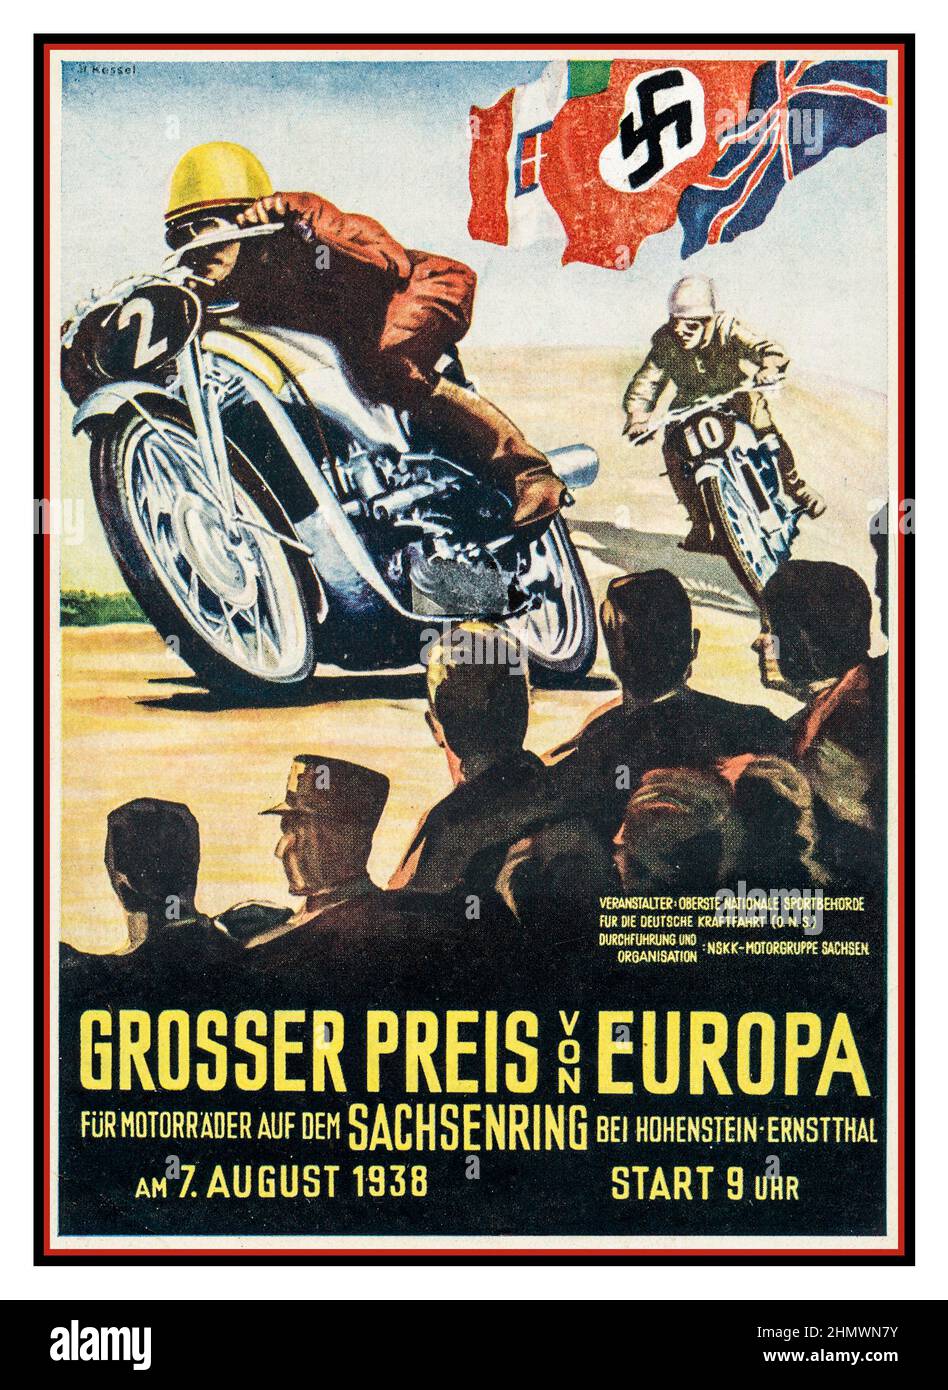 Nazi Propaganda: Grand Prix of Europe: 1938 GROSSER PREIS von EUROPA, colour propaganda poster advertisement for motorcycle racing motorbike race on the Sachsenring, with Nazi Swastika flag prominent on poster Nazi Germany Stock Photo